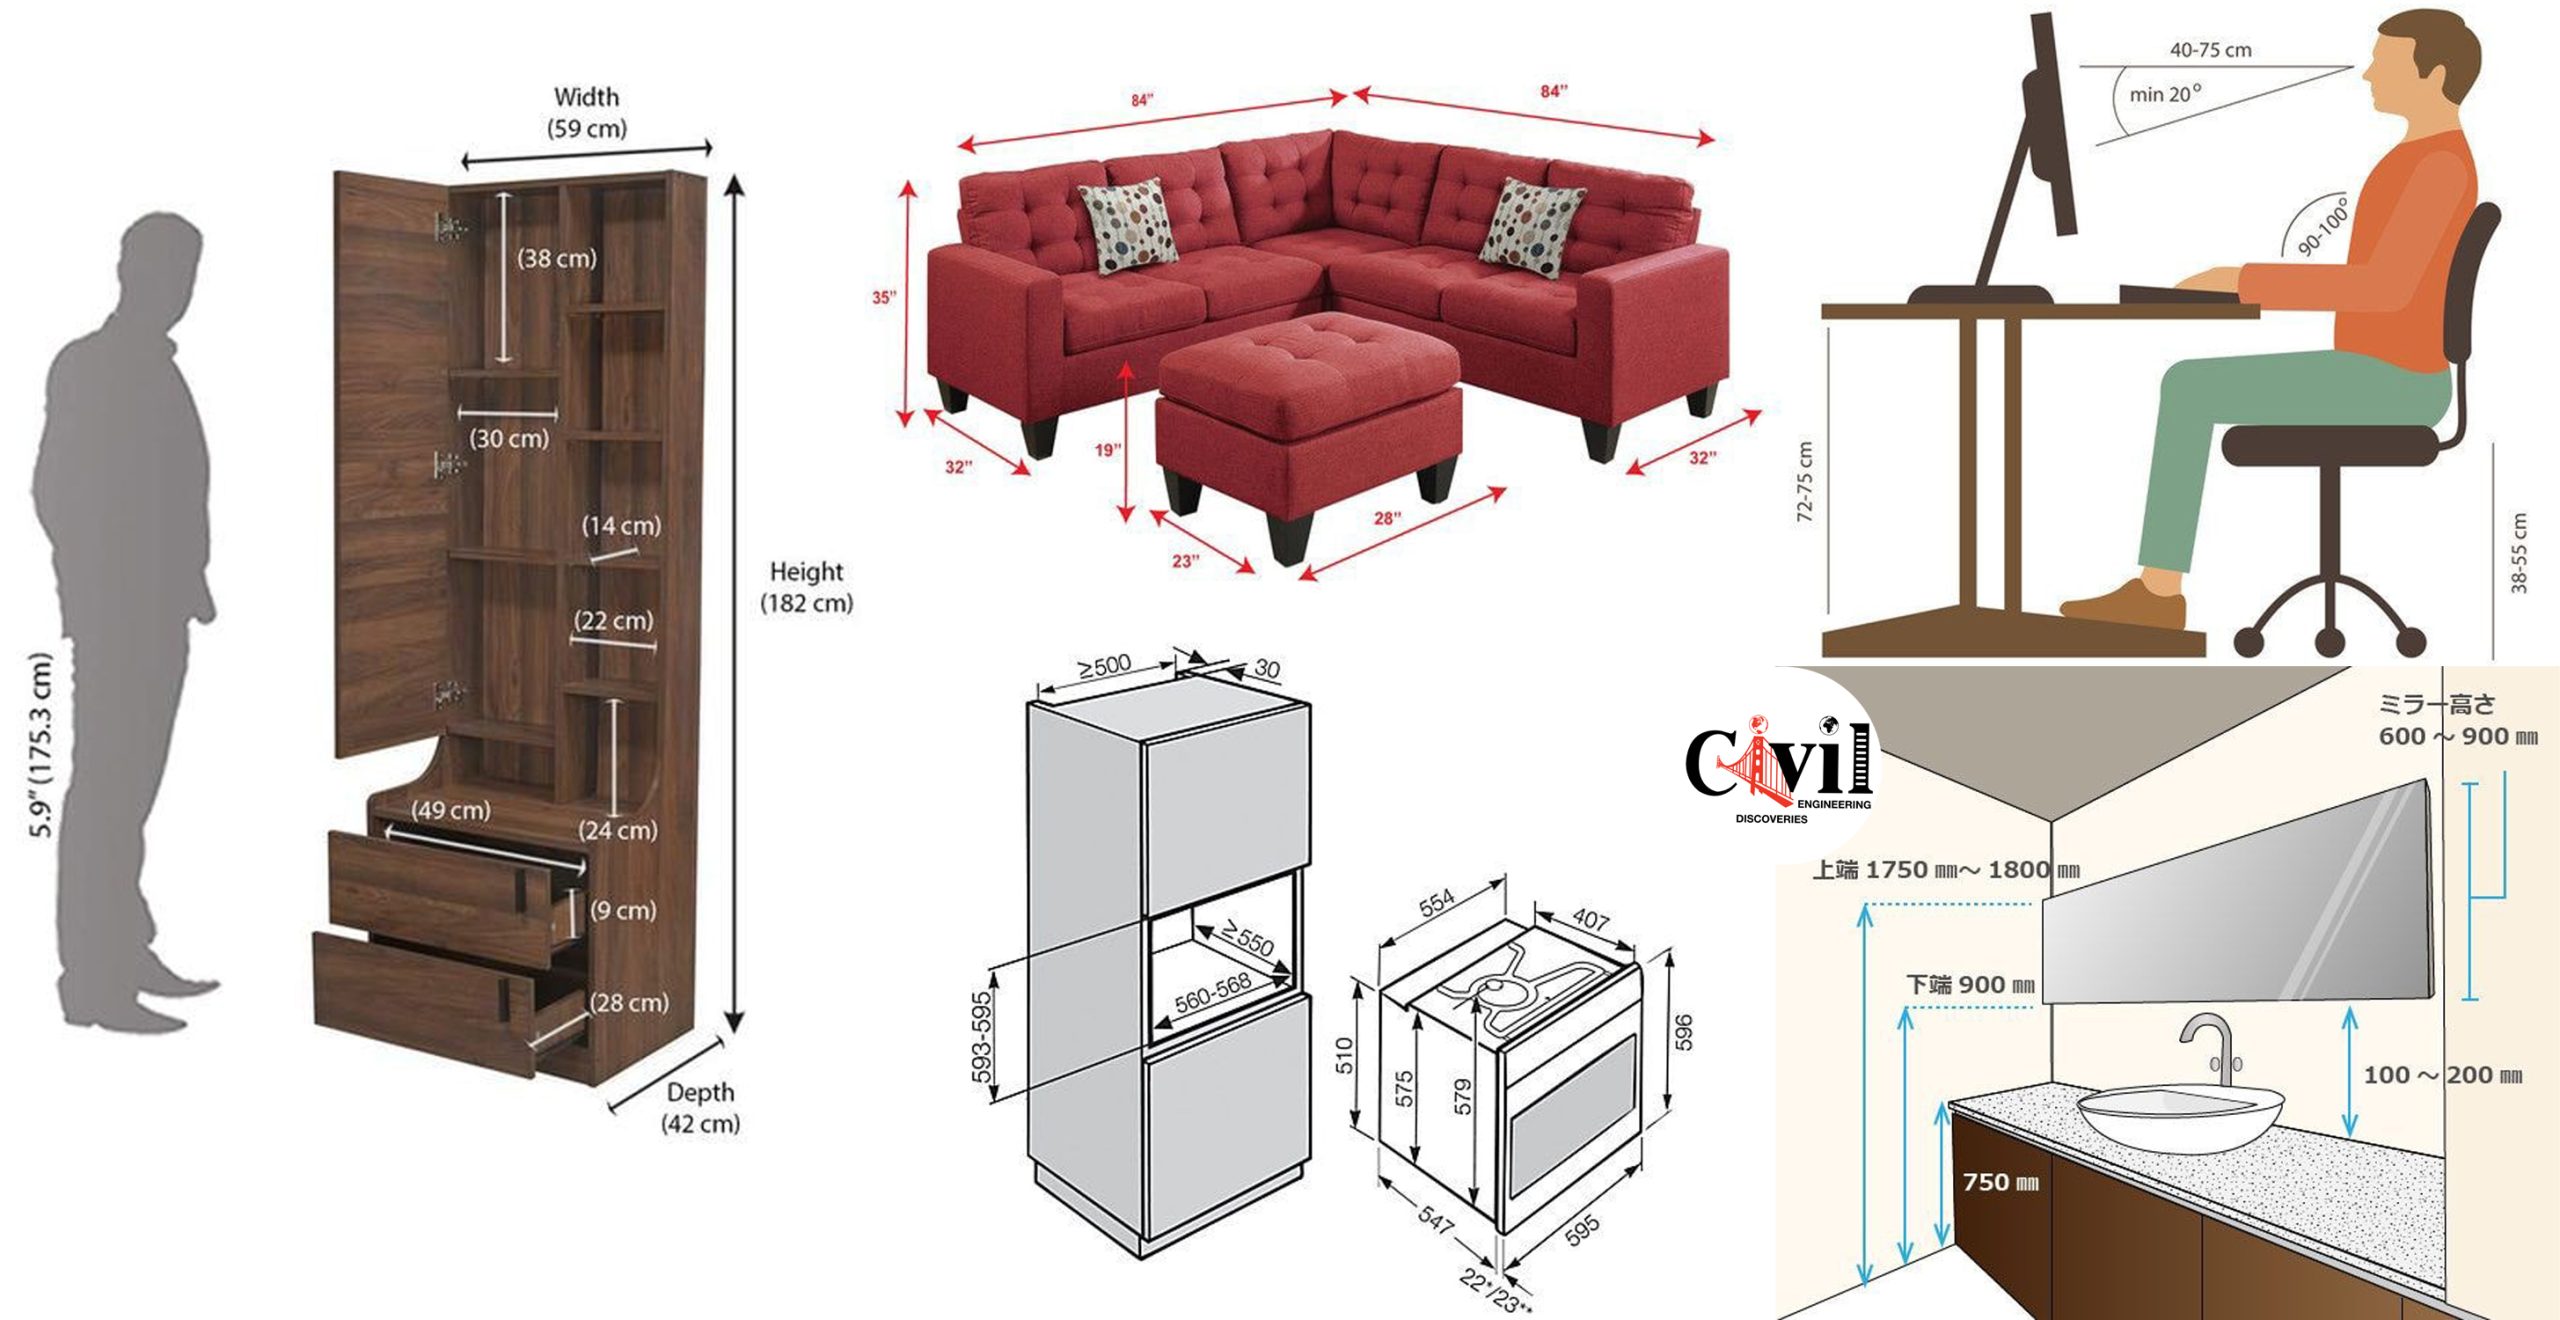 Dimensions Of Home Furniture